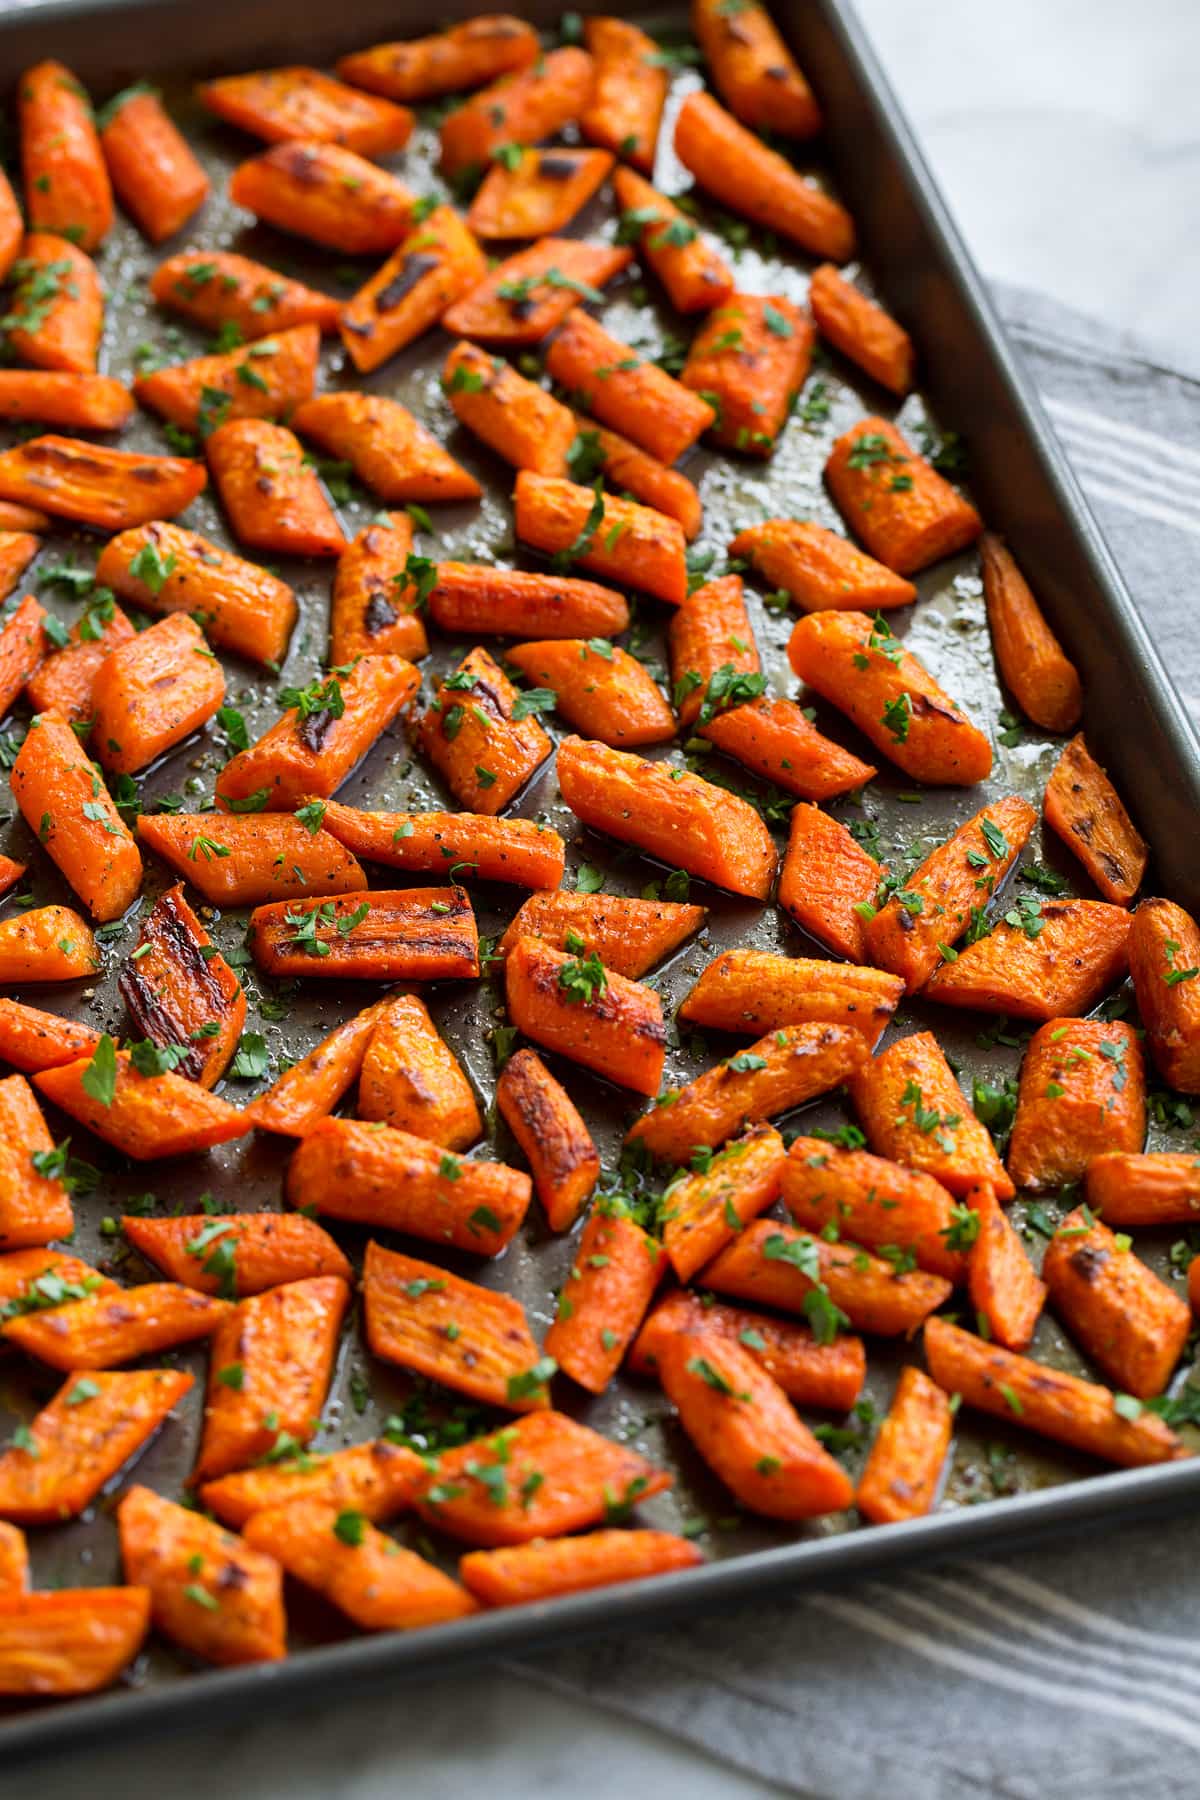 Photo: Roasted carrots shown from the side on a dark baking sheet.